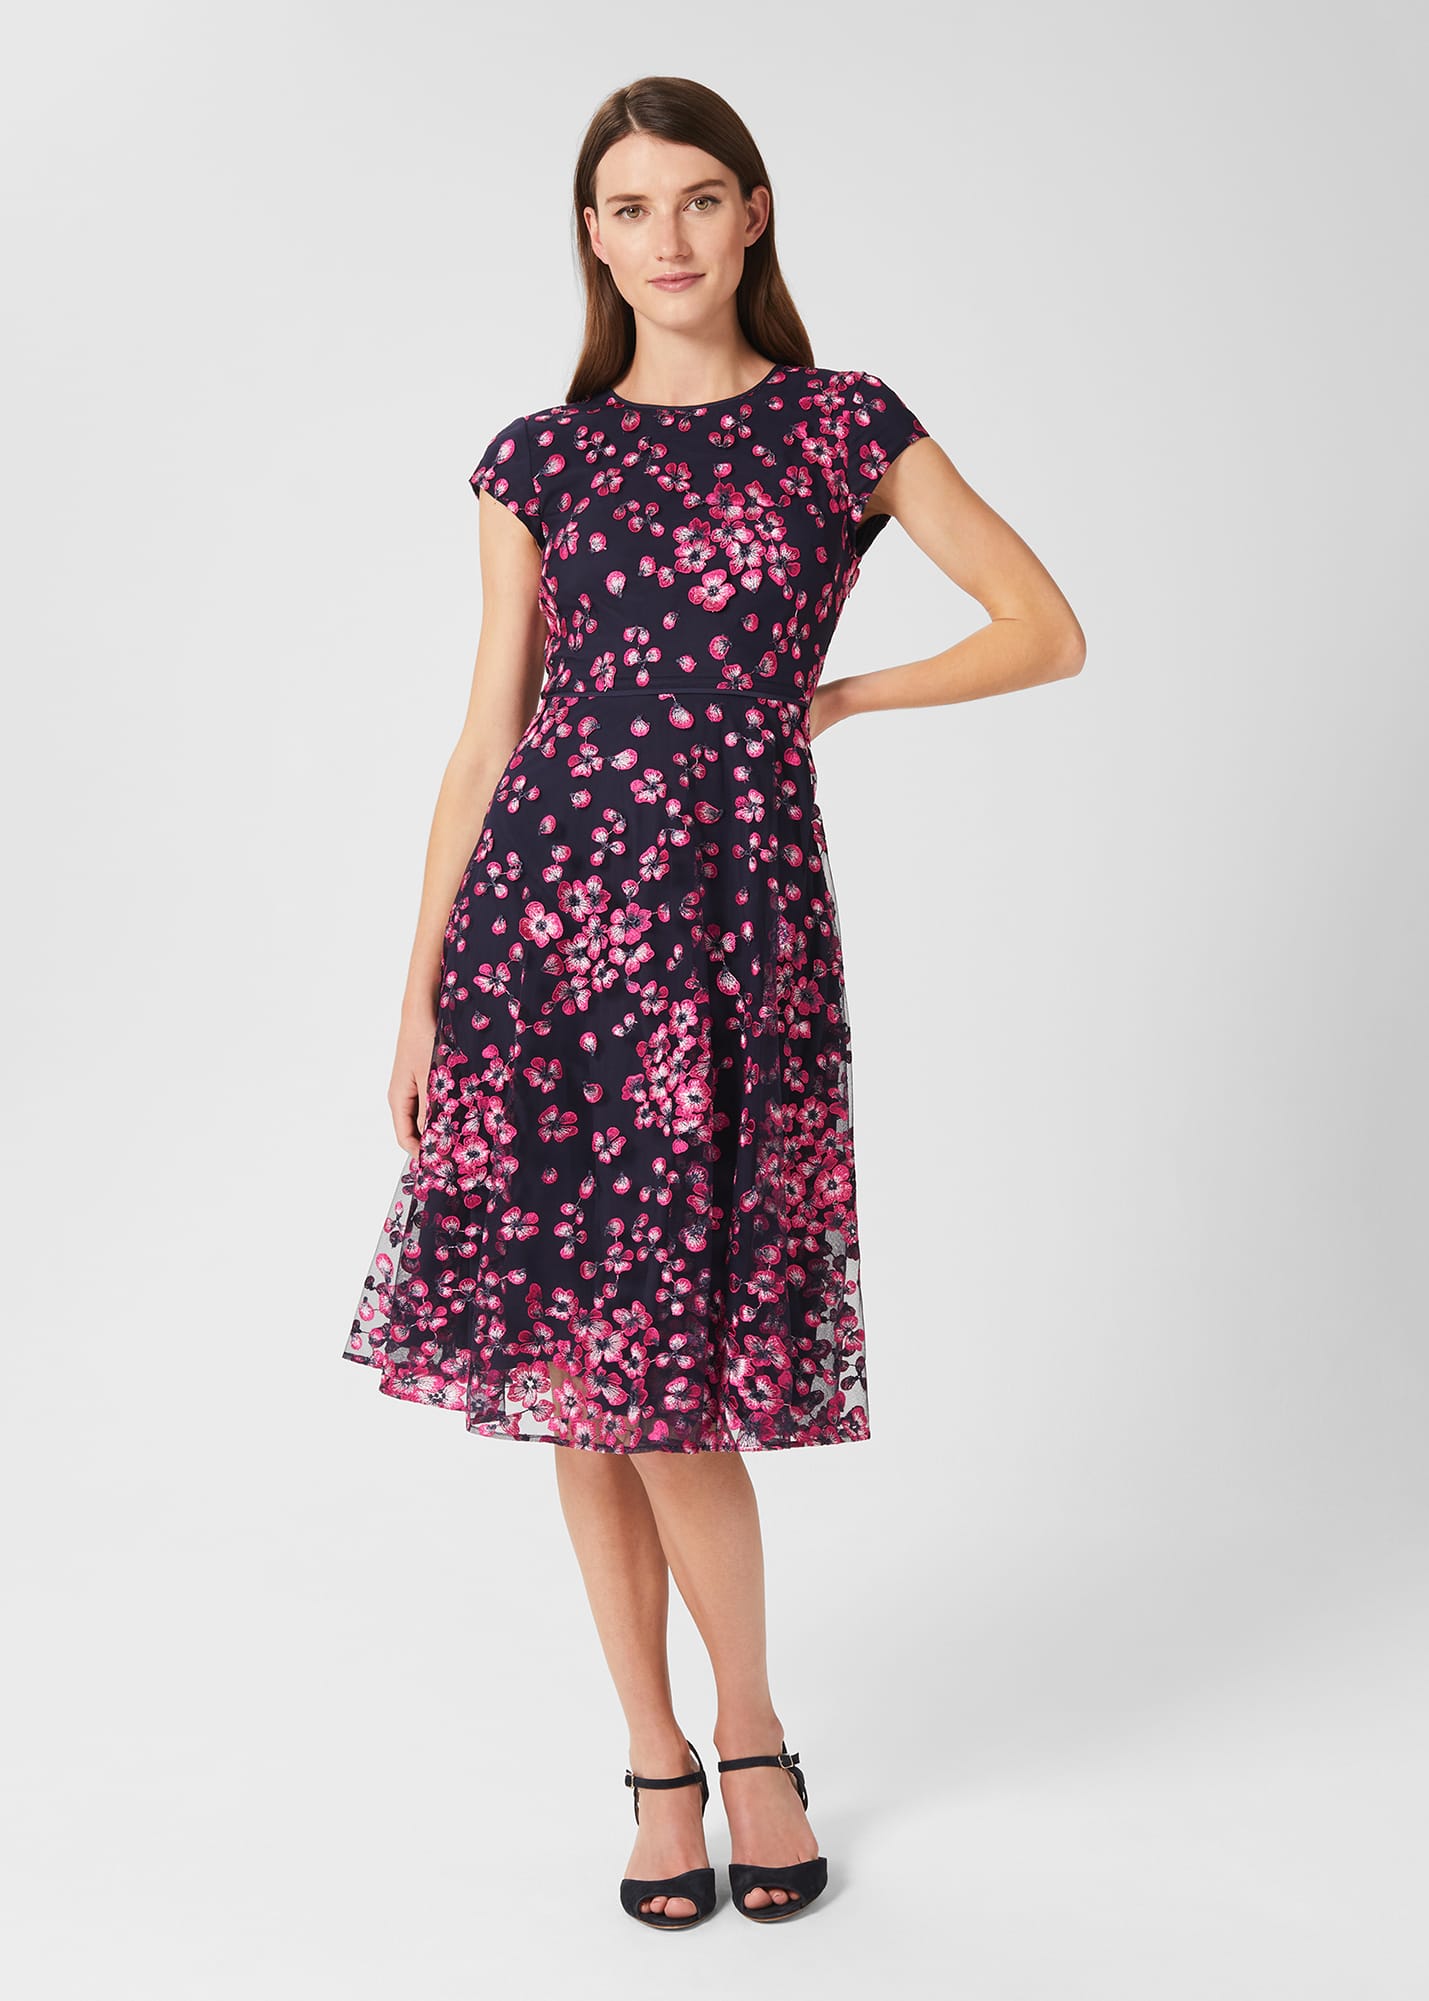 Hobbs Women's Tia Floral Embroidered Dress - Navy Pink